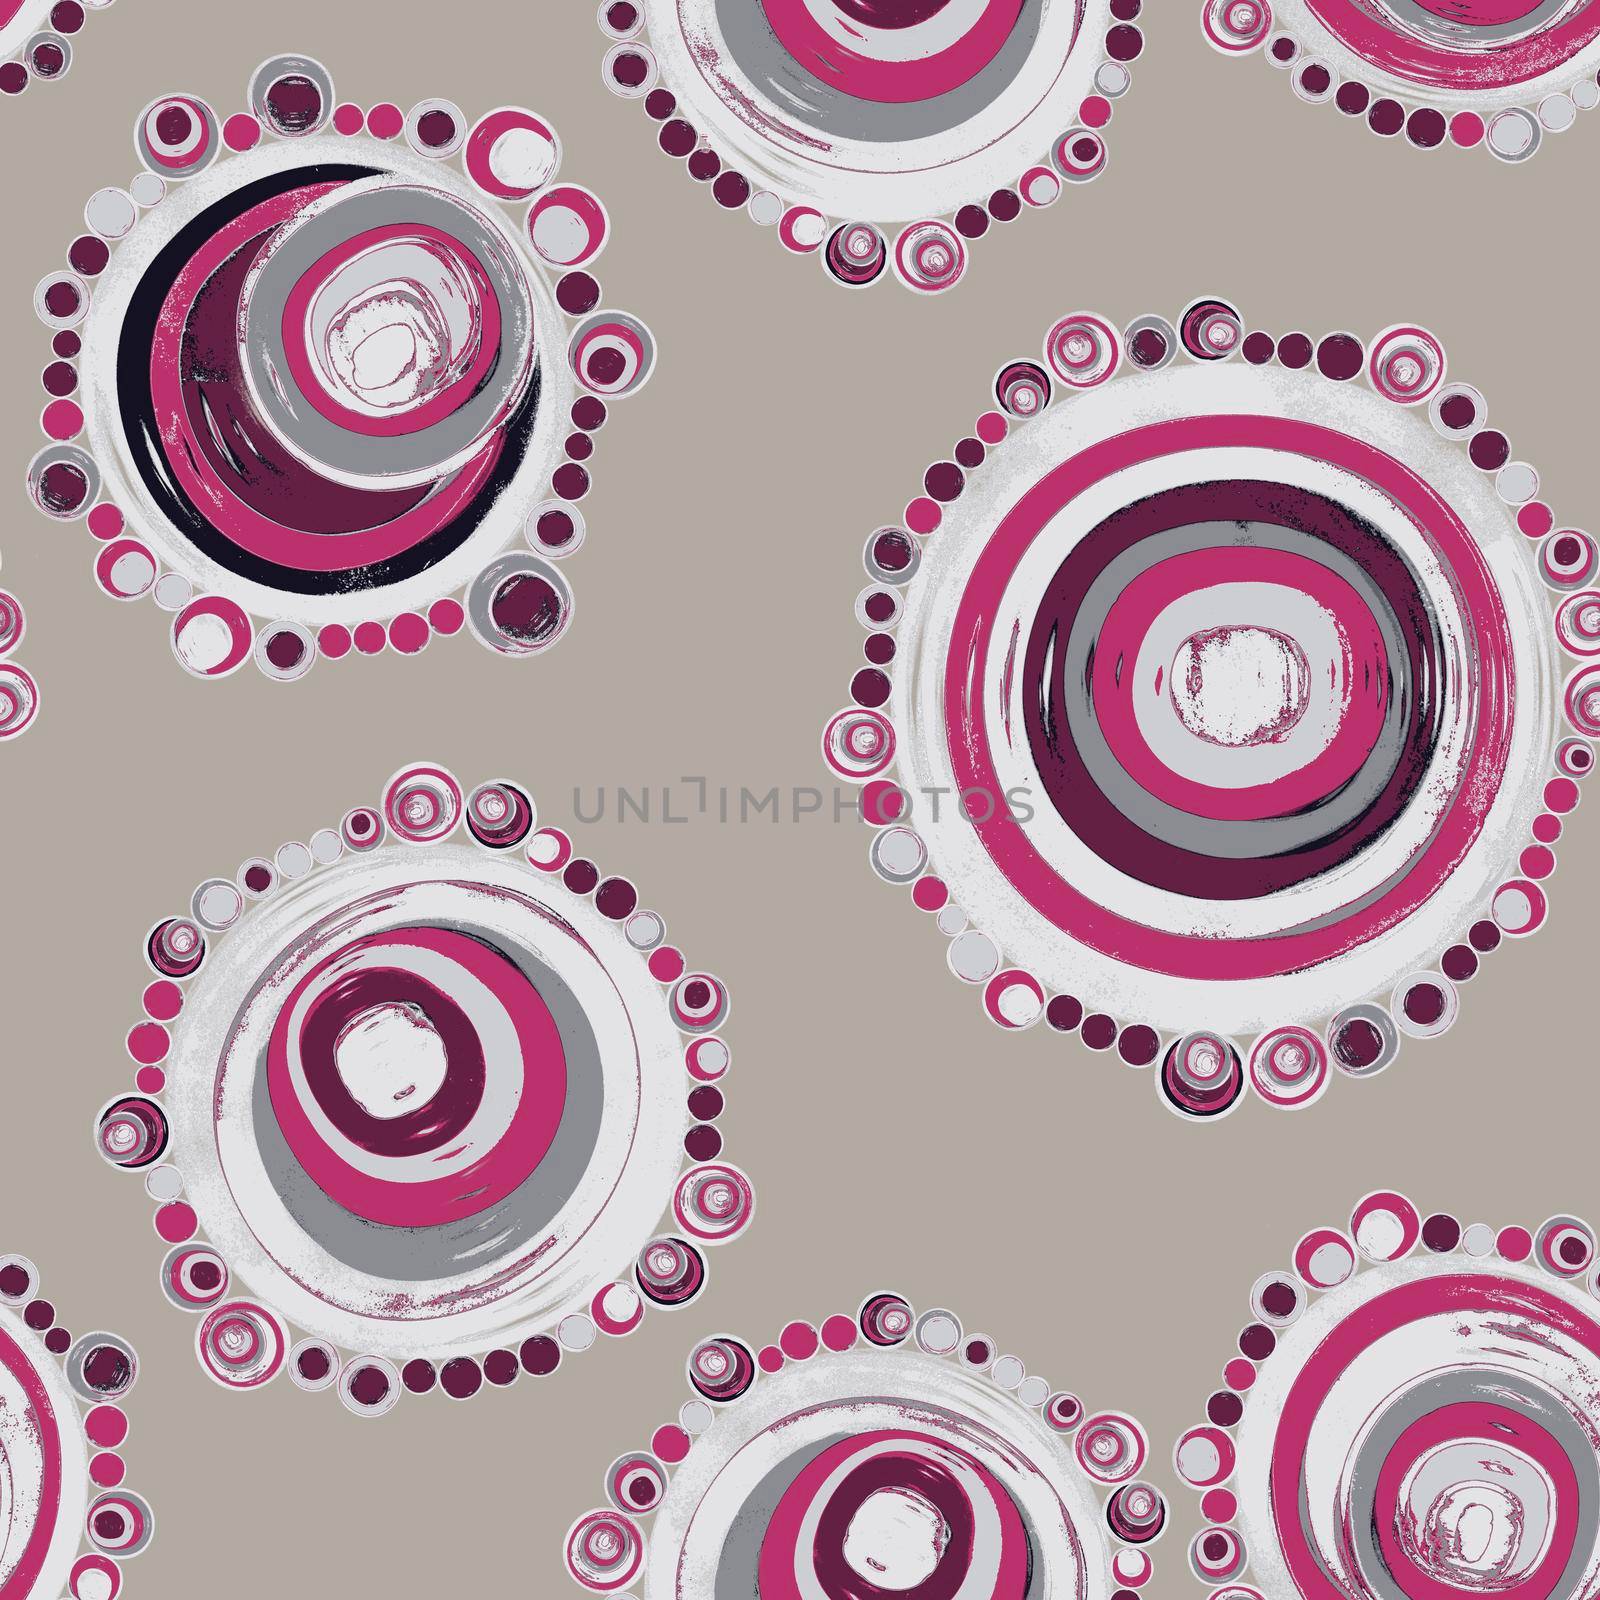 Repeating pattern with circles filled with dots by Angelsmoon